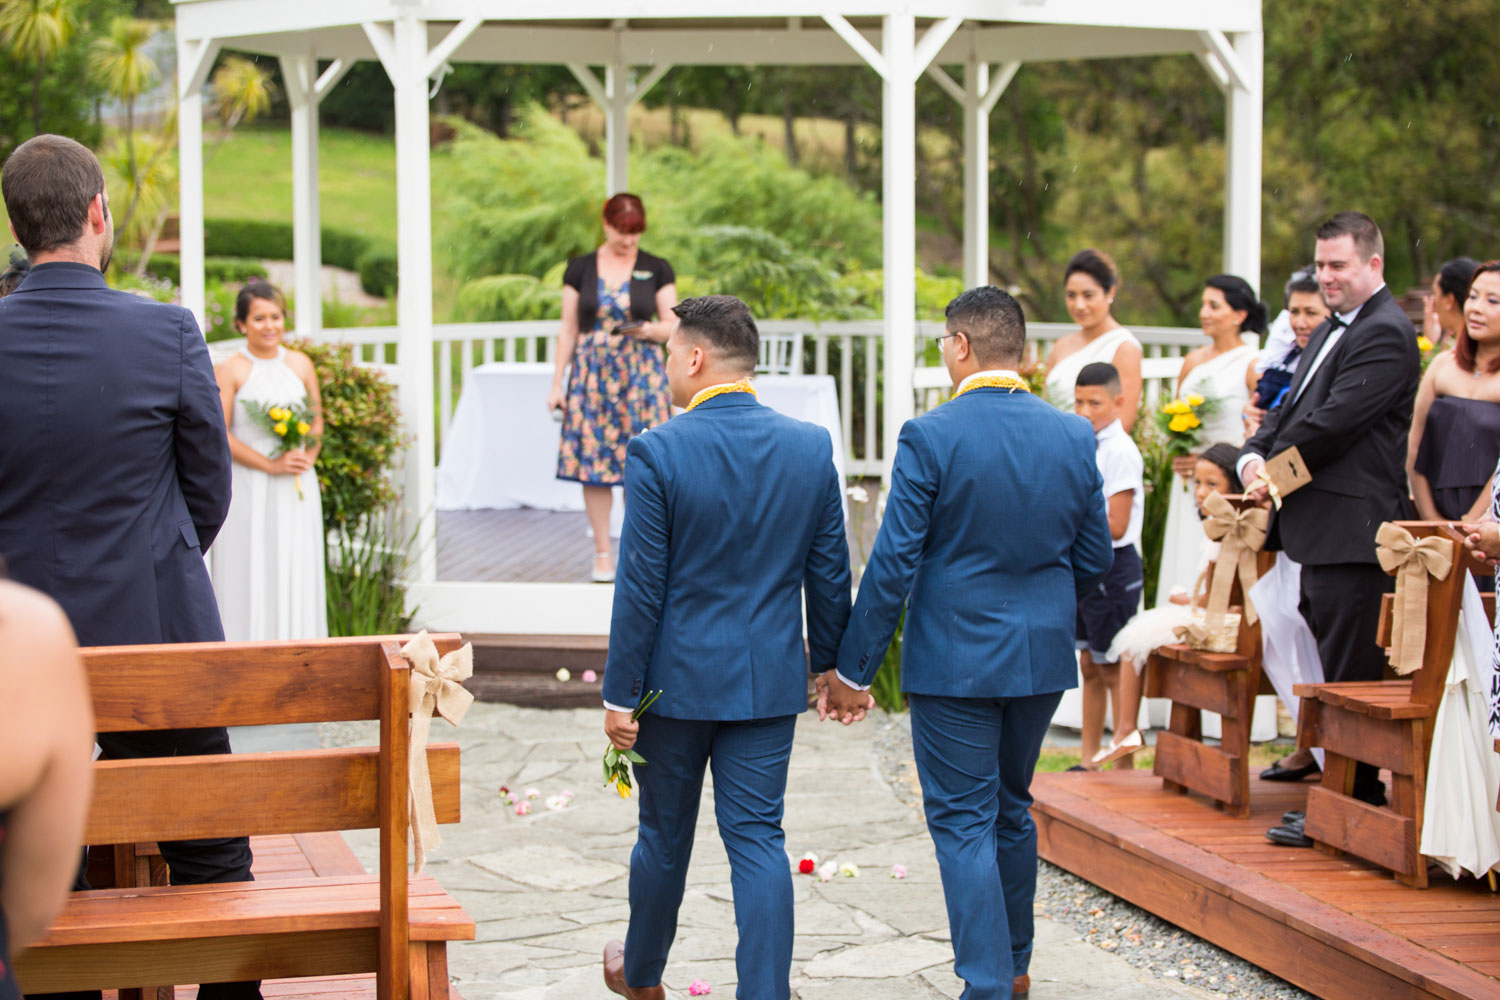 gracehill auckland wedding guest reaction to the couple walking in